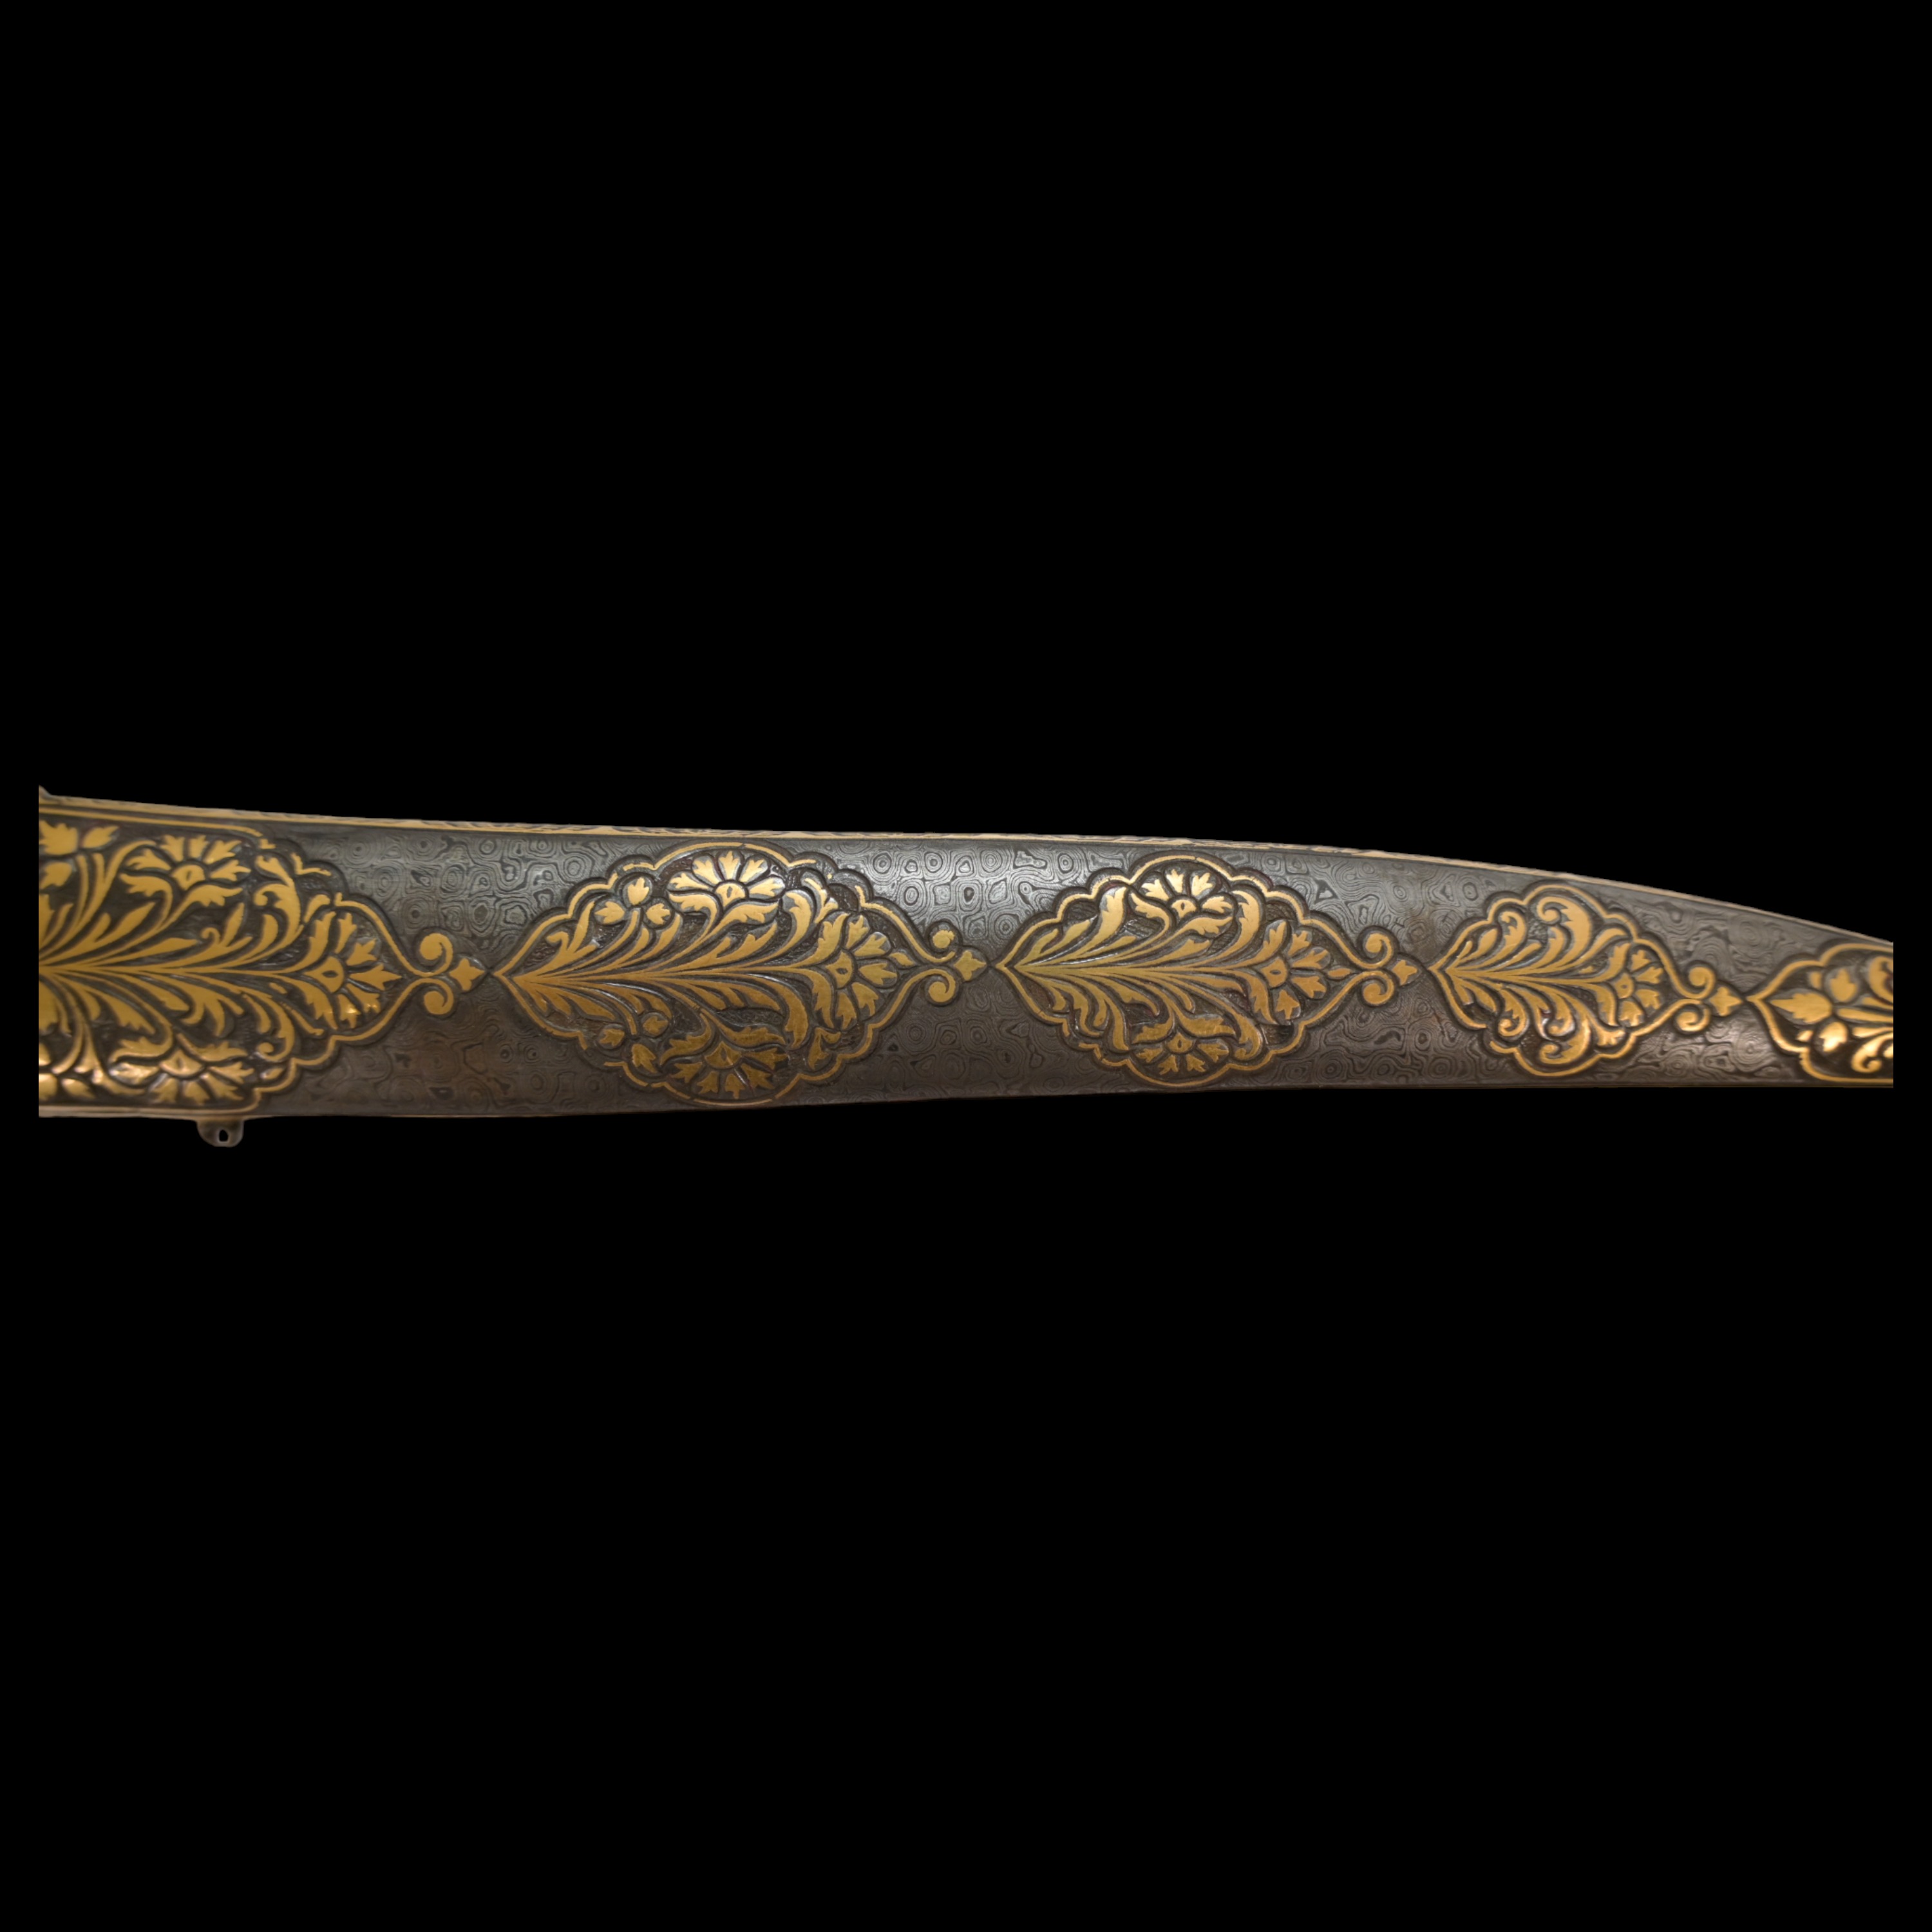 Richly decorated gold kofgari Indian dagger with wootz blade, 19th century. - Image 5 of 12